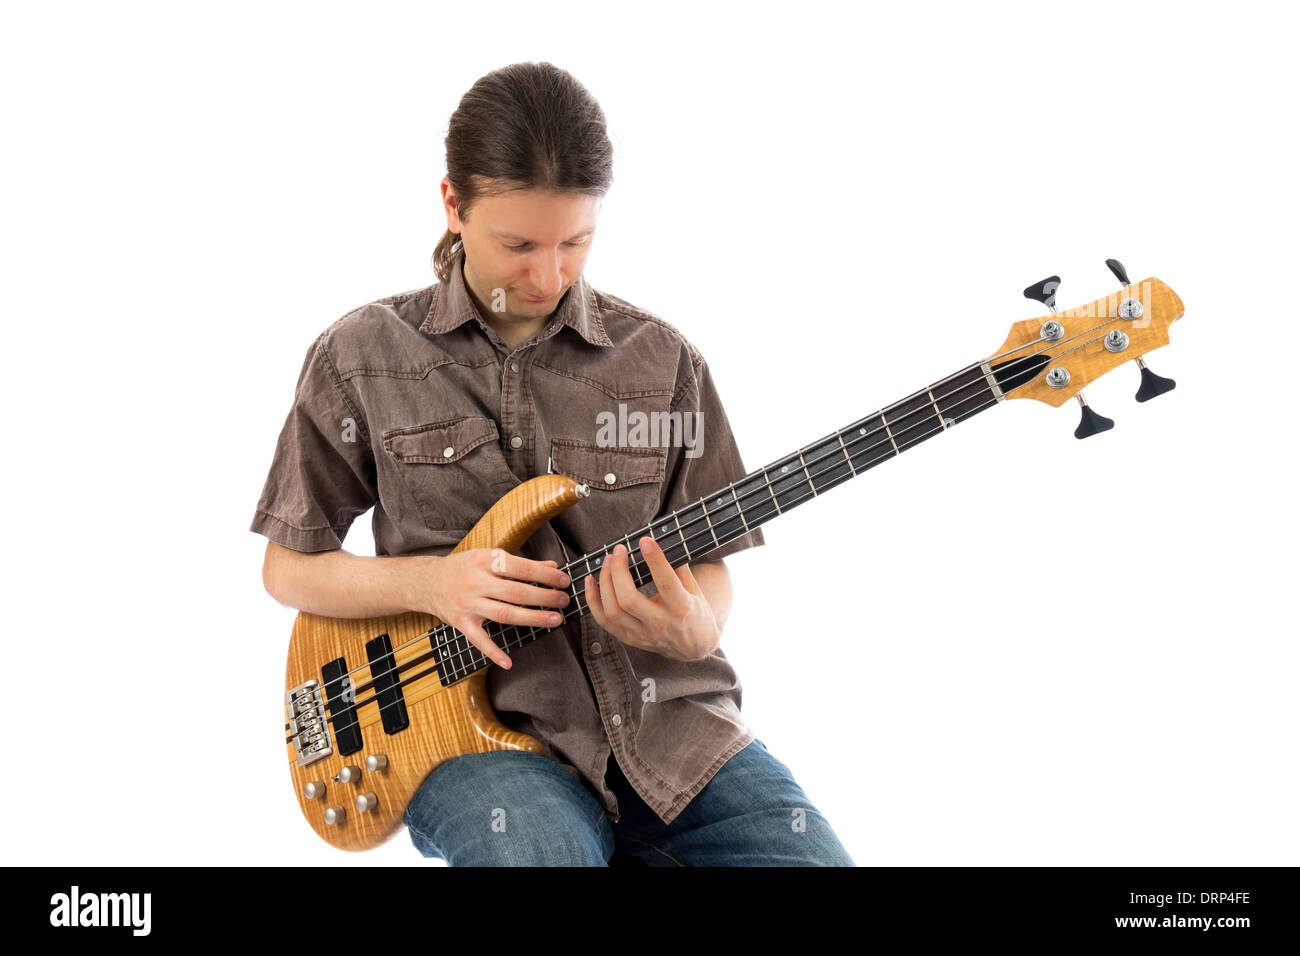 Bass guitarist playing a bass guitar (Series with the same model available) Stock Photo